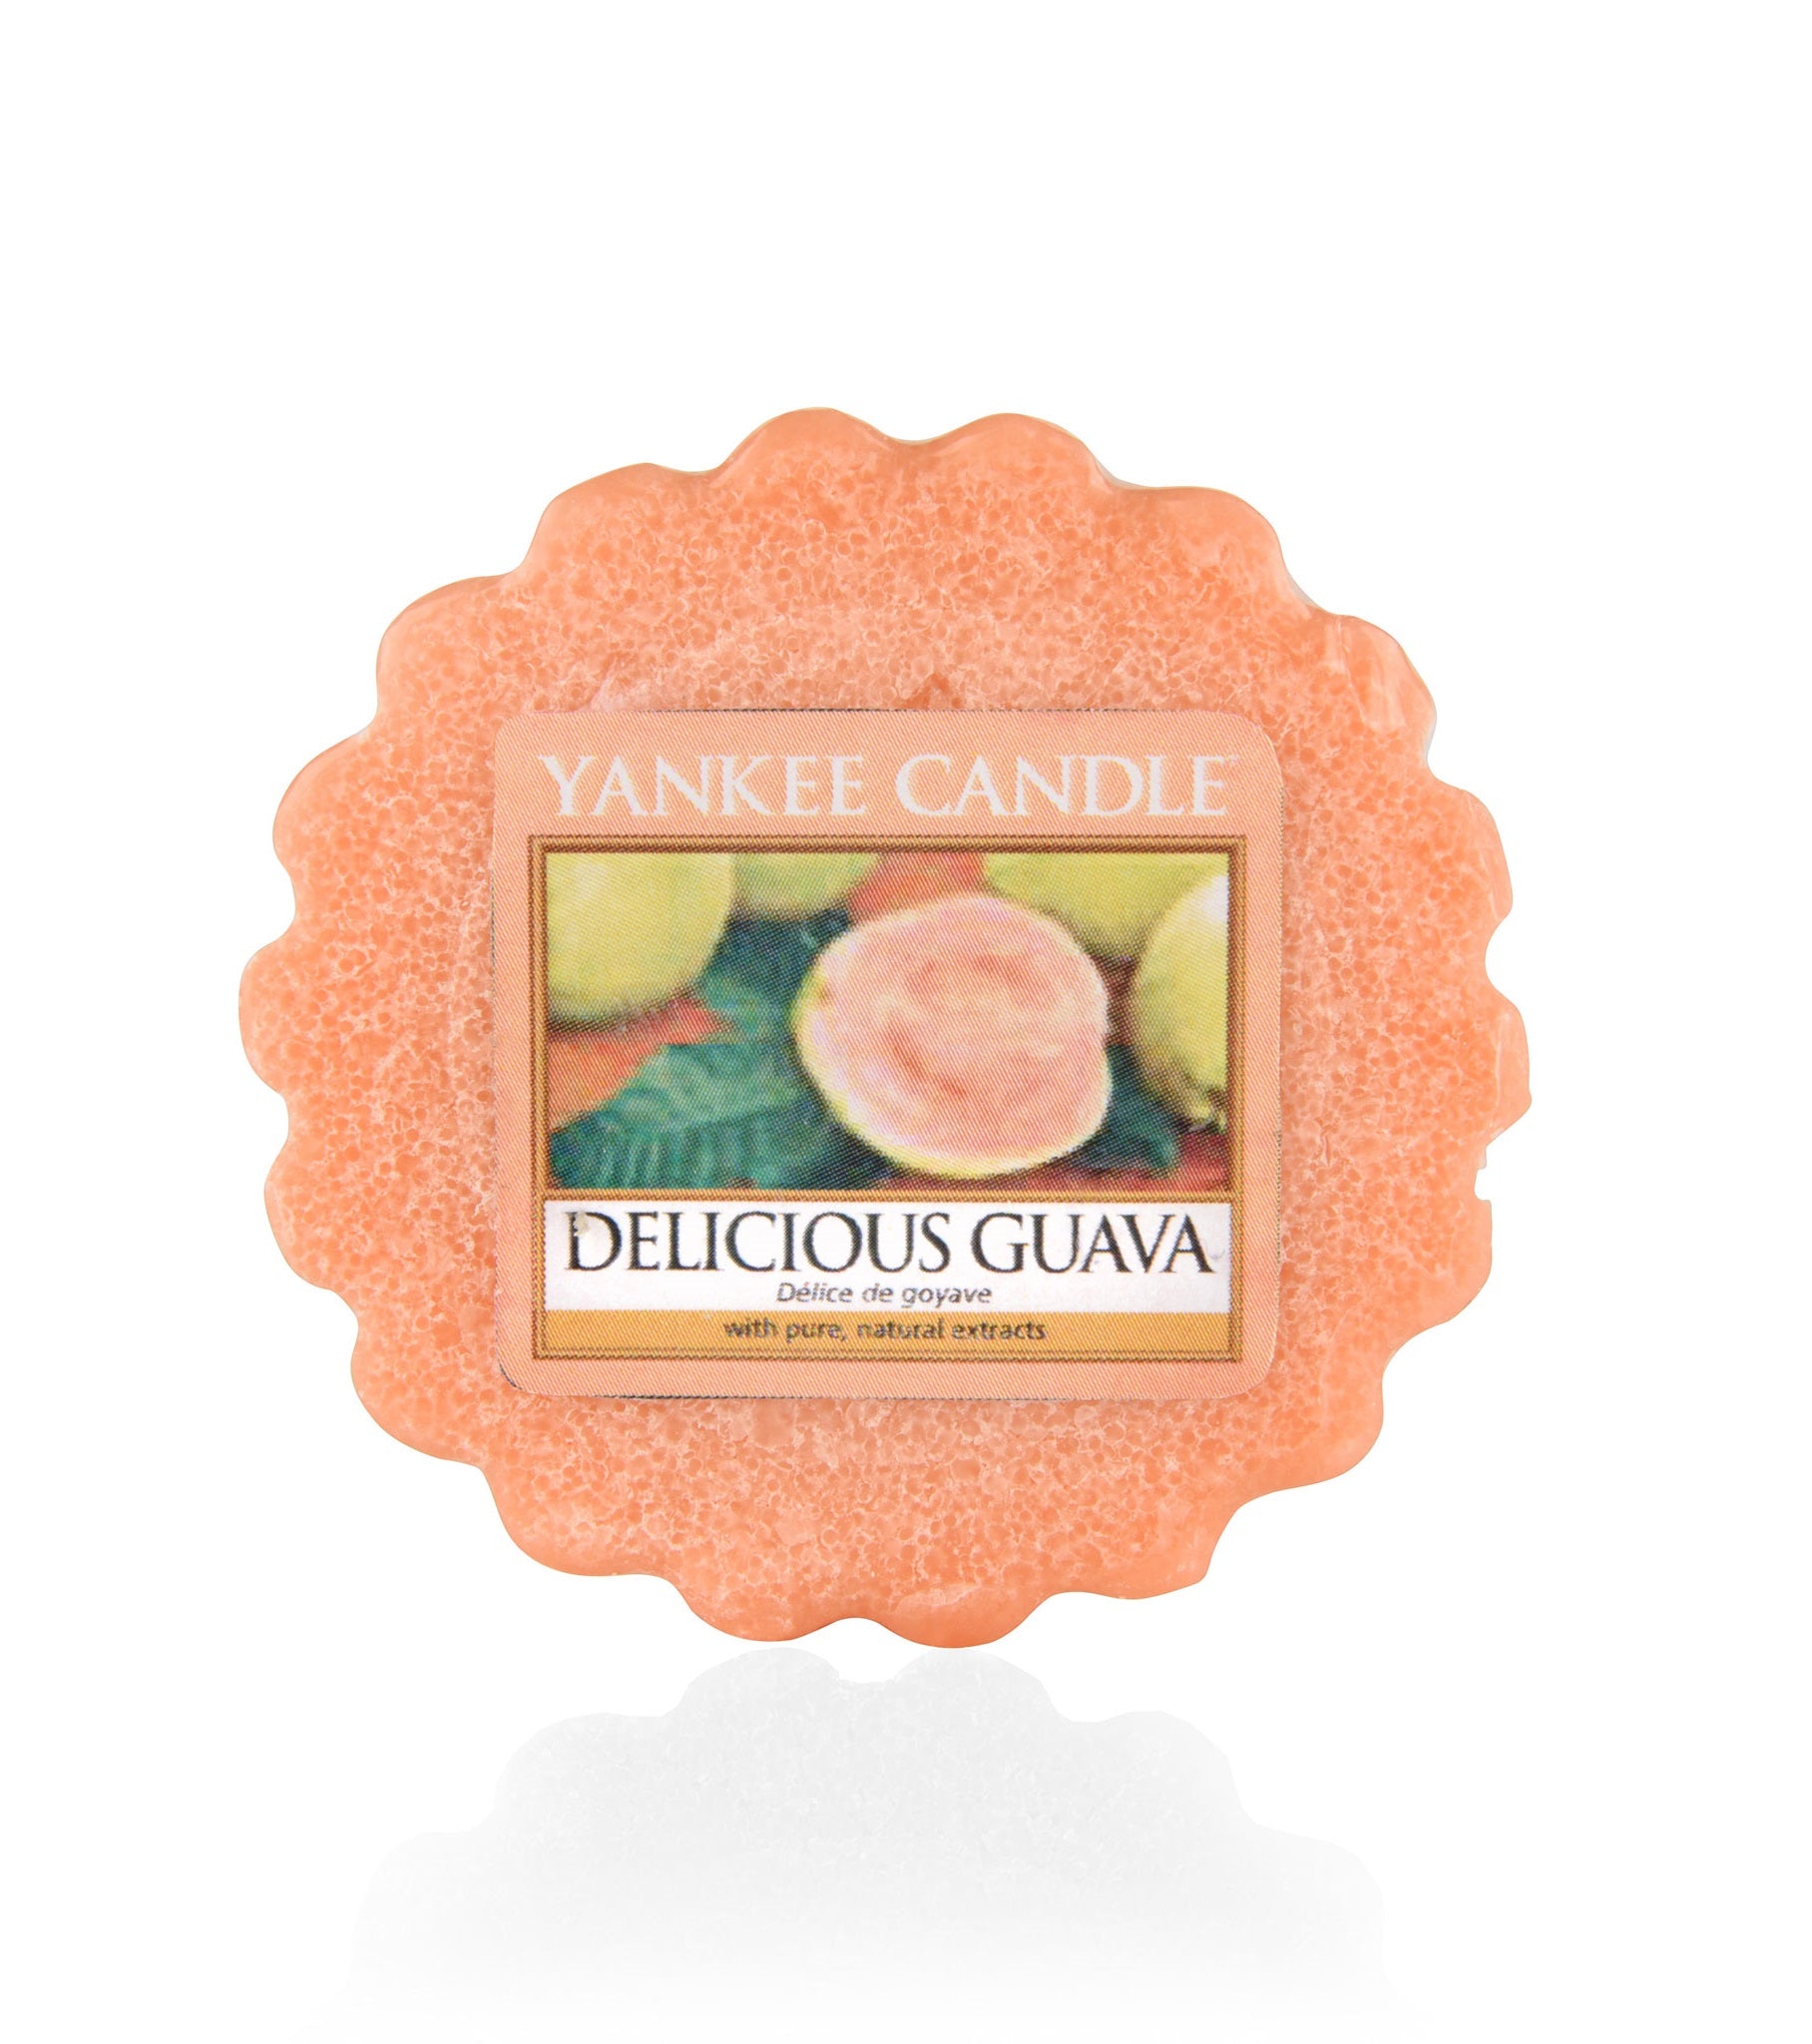 DELICIOUS GUAVA -Yankee Candle- Tart